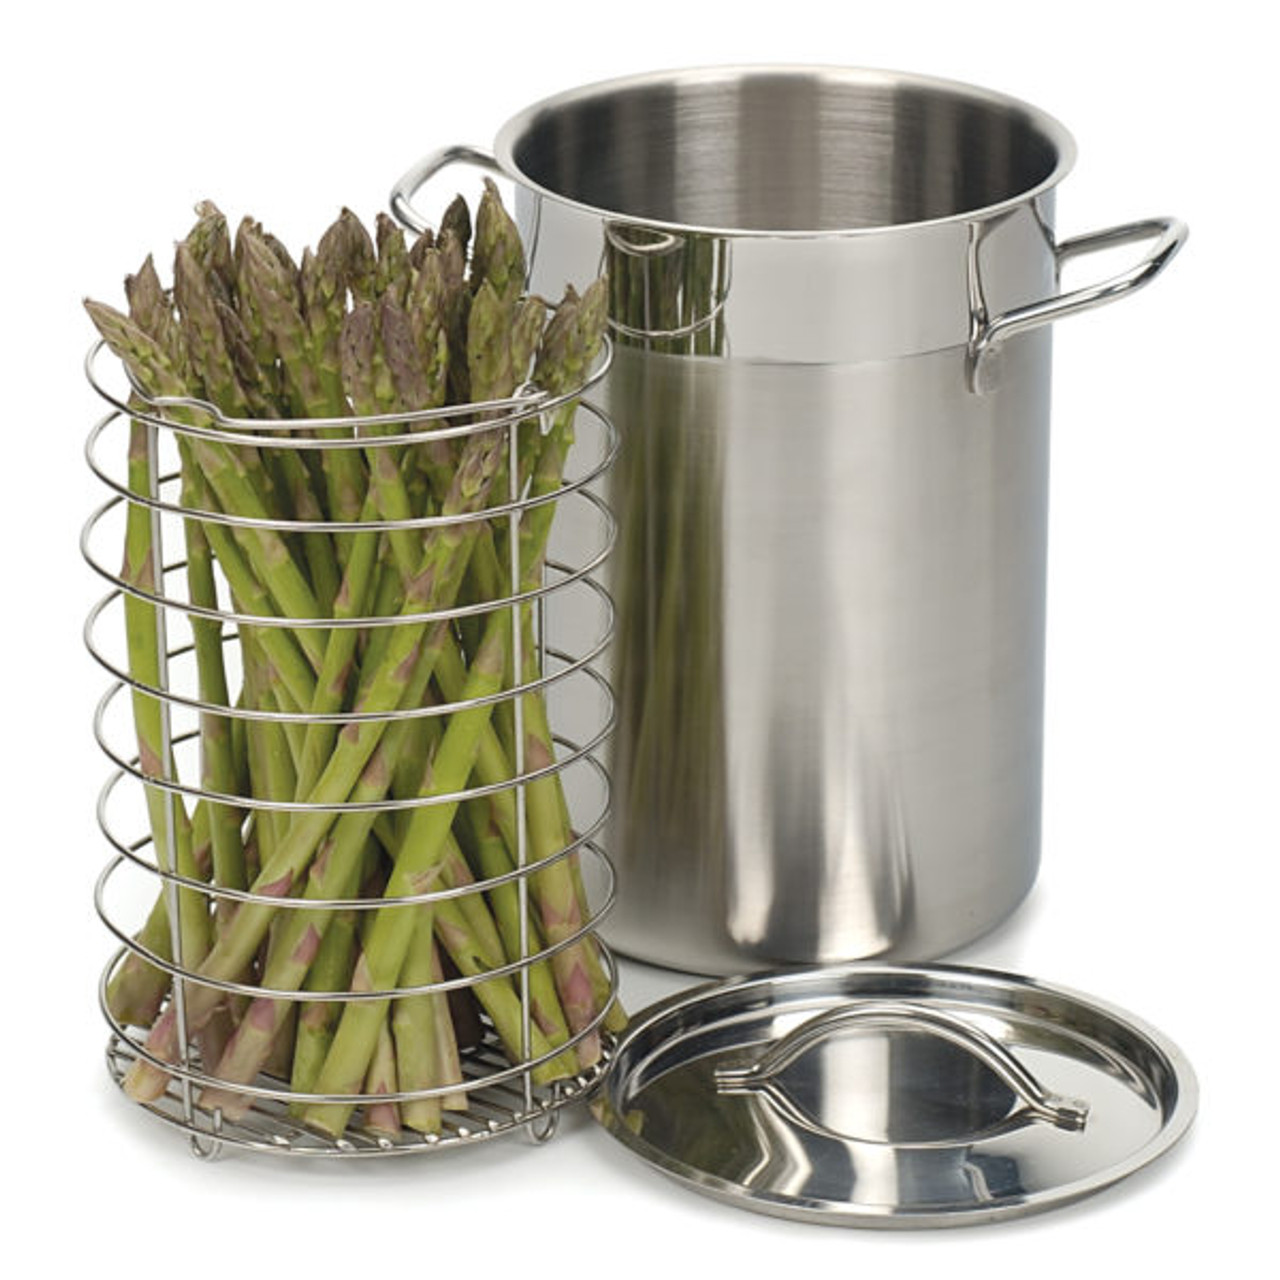 All-Clad Stainless Steel Asparagus/Veggie Steamer Pot~Basket and Lid -  household items - by owner - housewares sale 